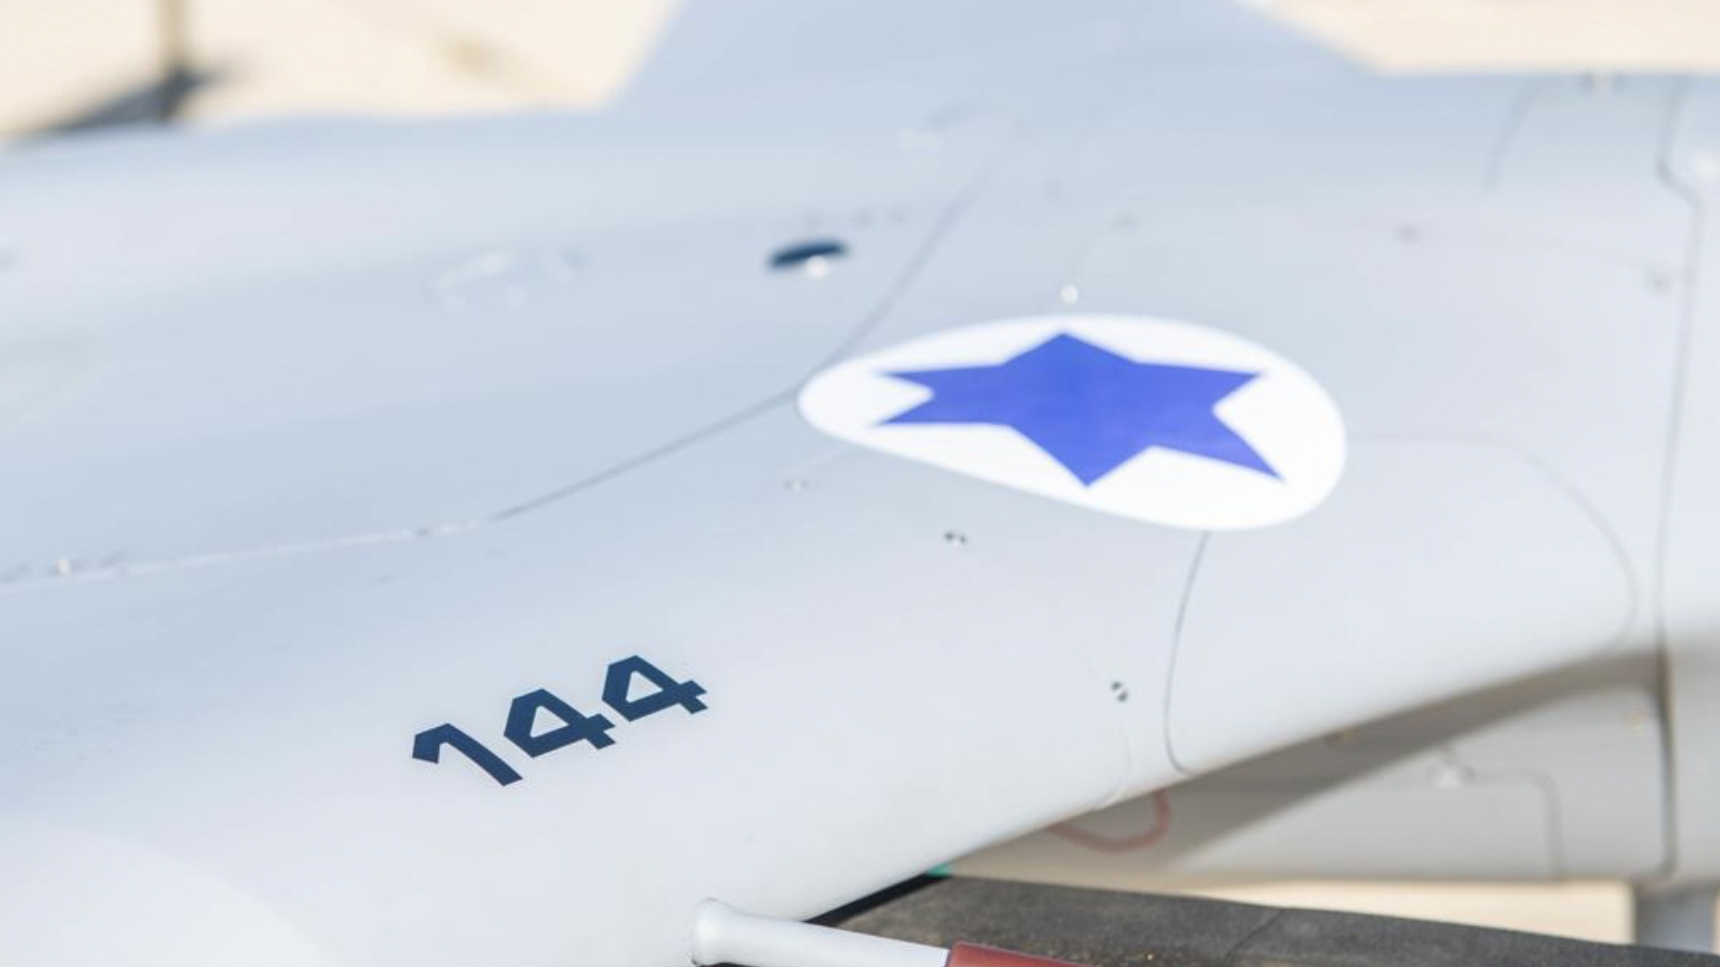 Israel’s air force officially receives new, secretive Spark UAV, ‘gateway’ to 5th gen drones